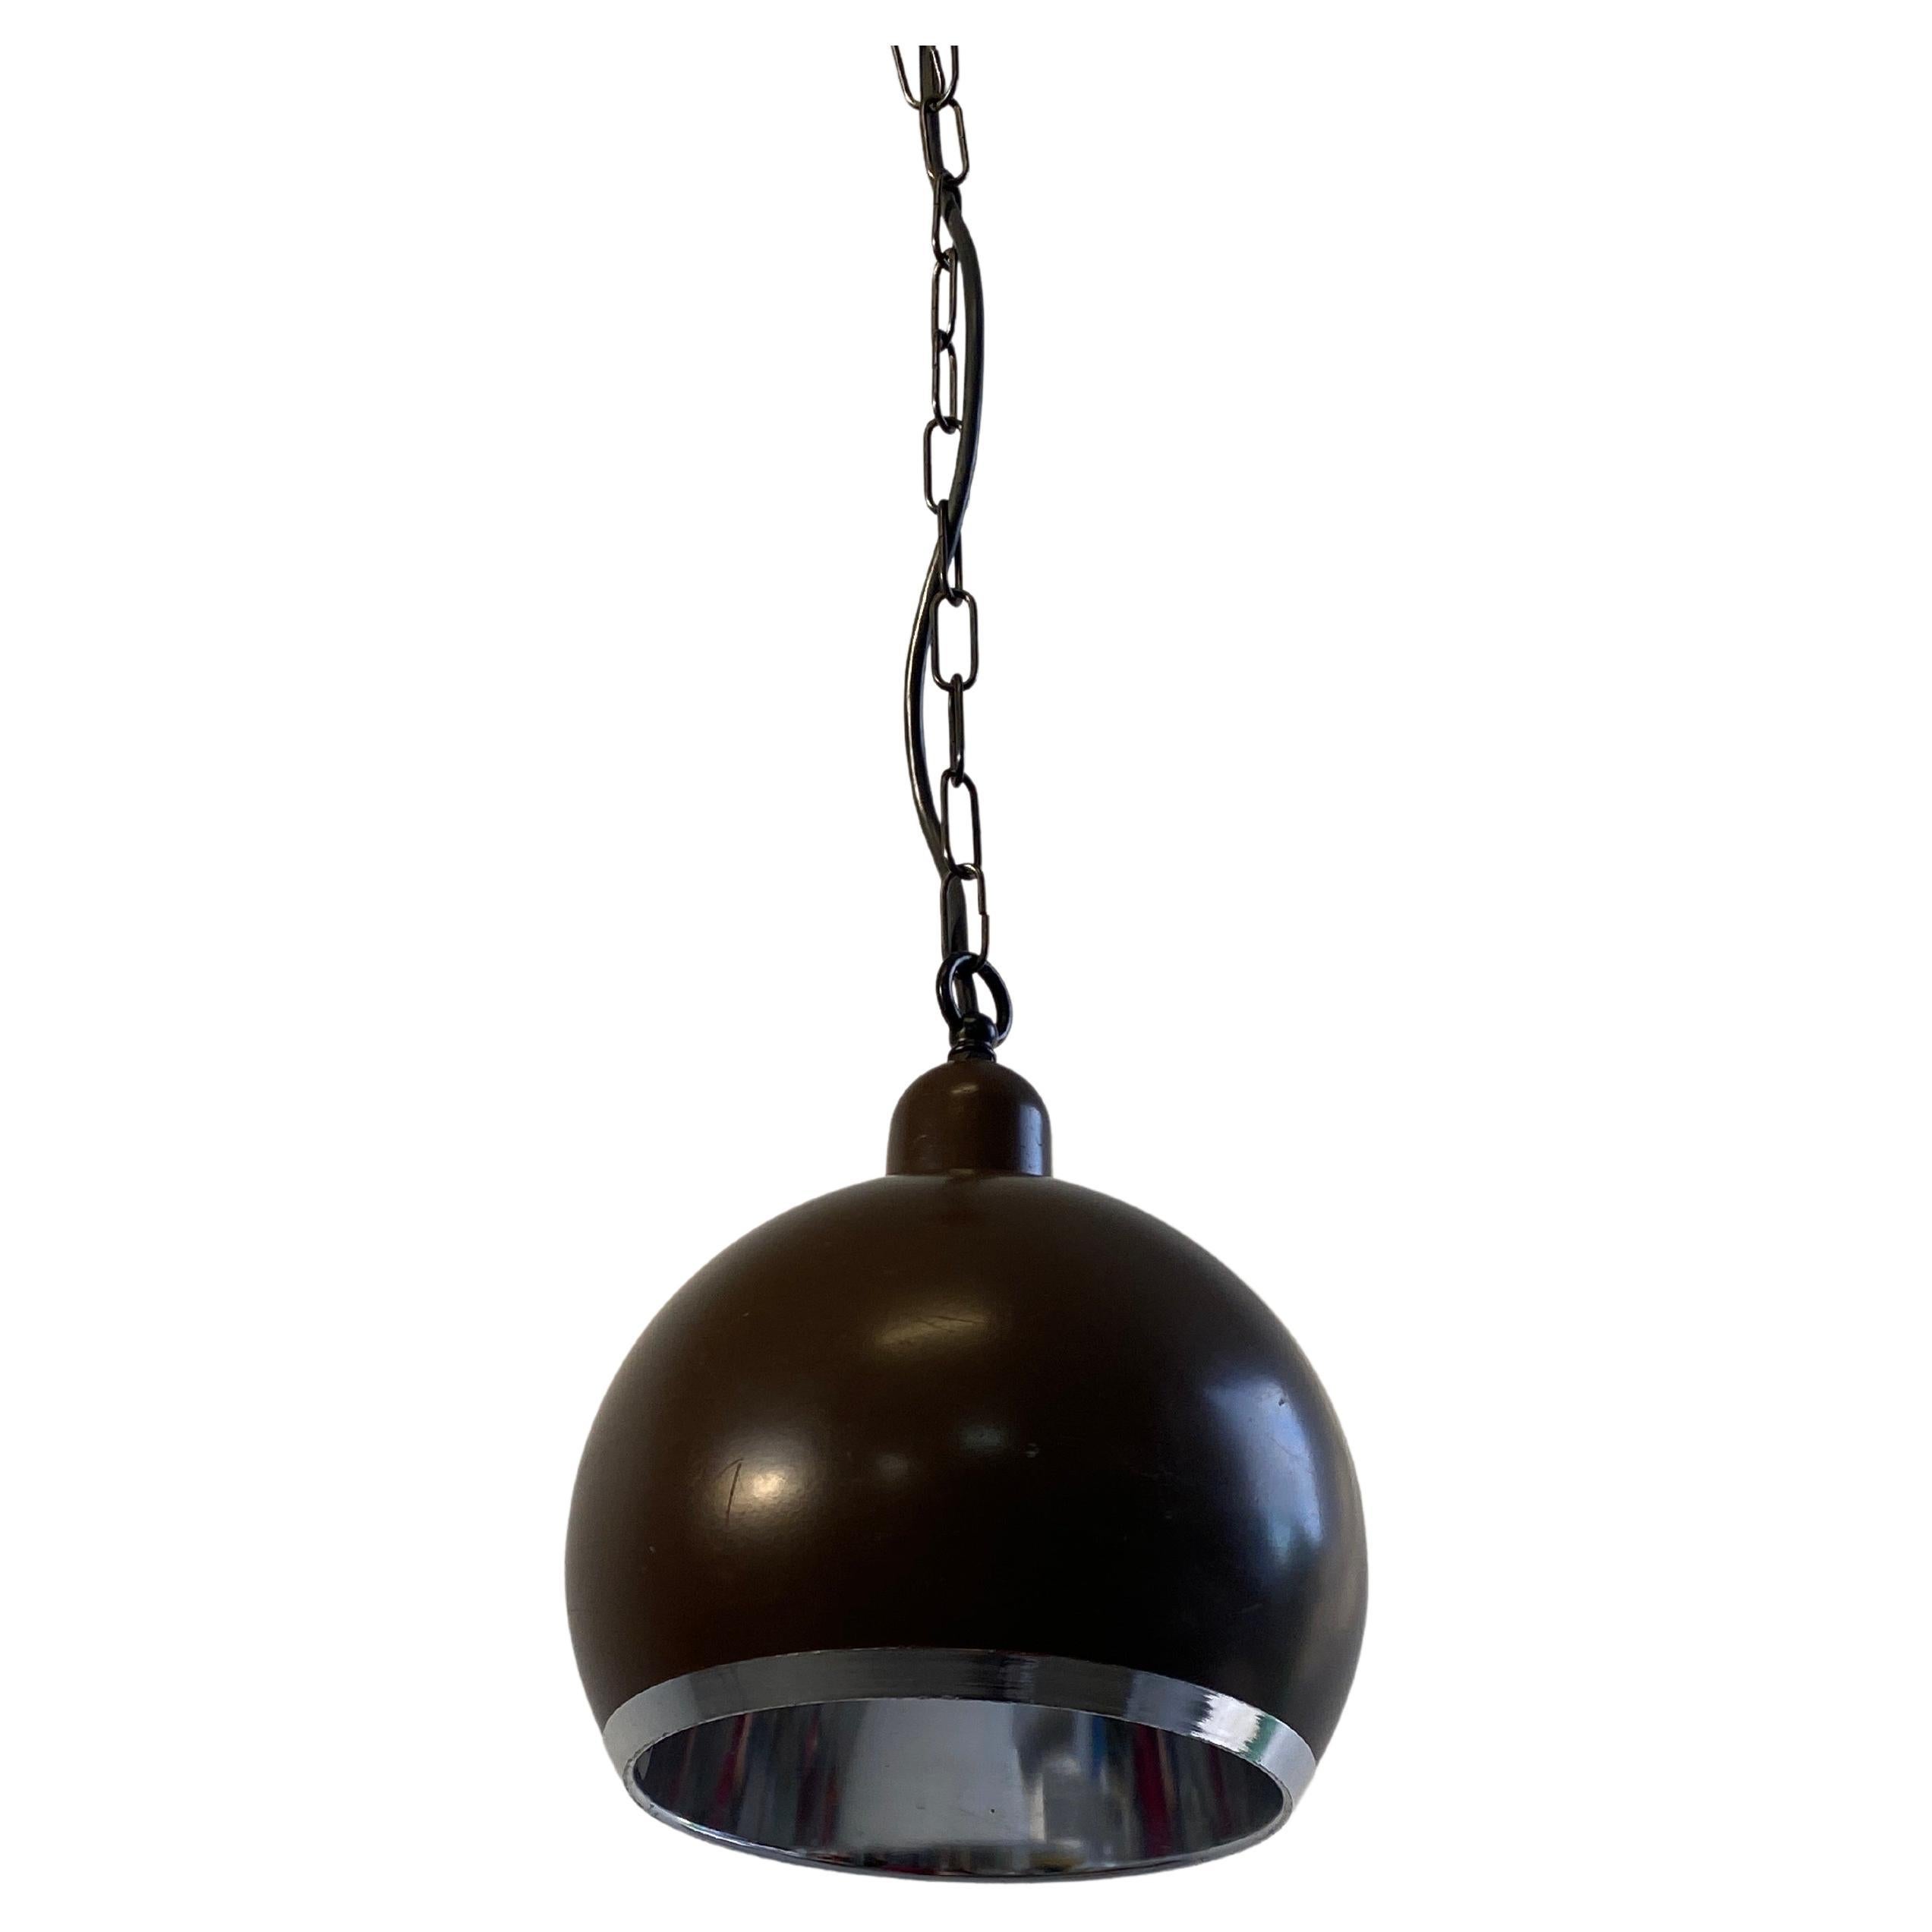 Spaceage Brown and Chrome 70s Pendant Light / Mid-Century Modern Ceiling Lamp